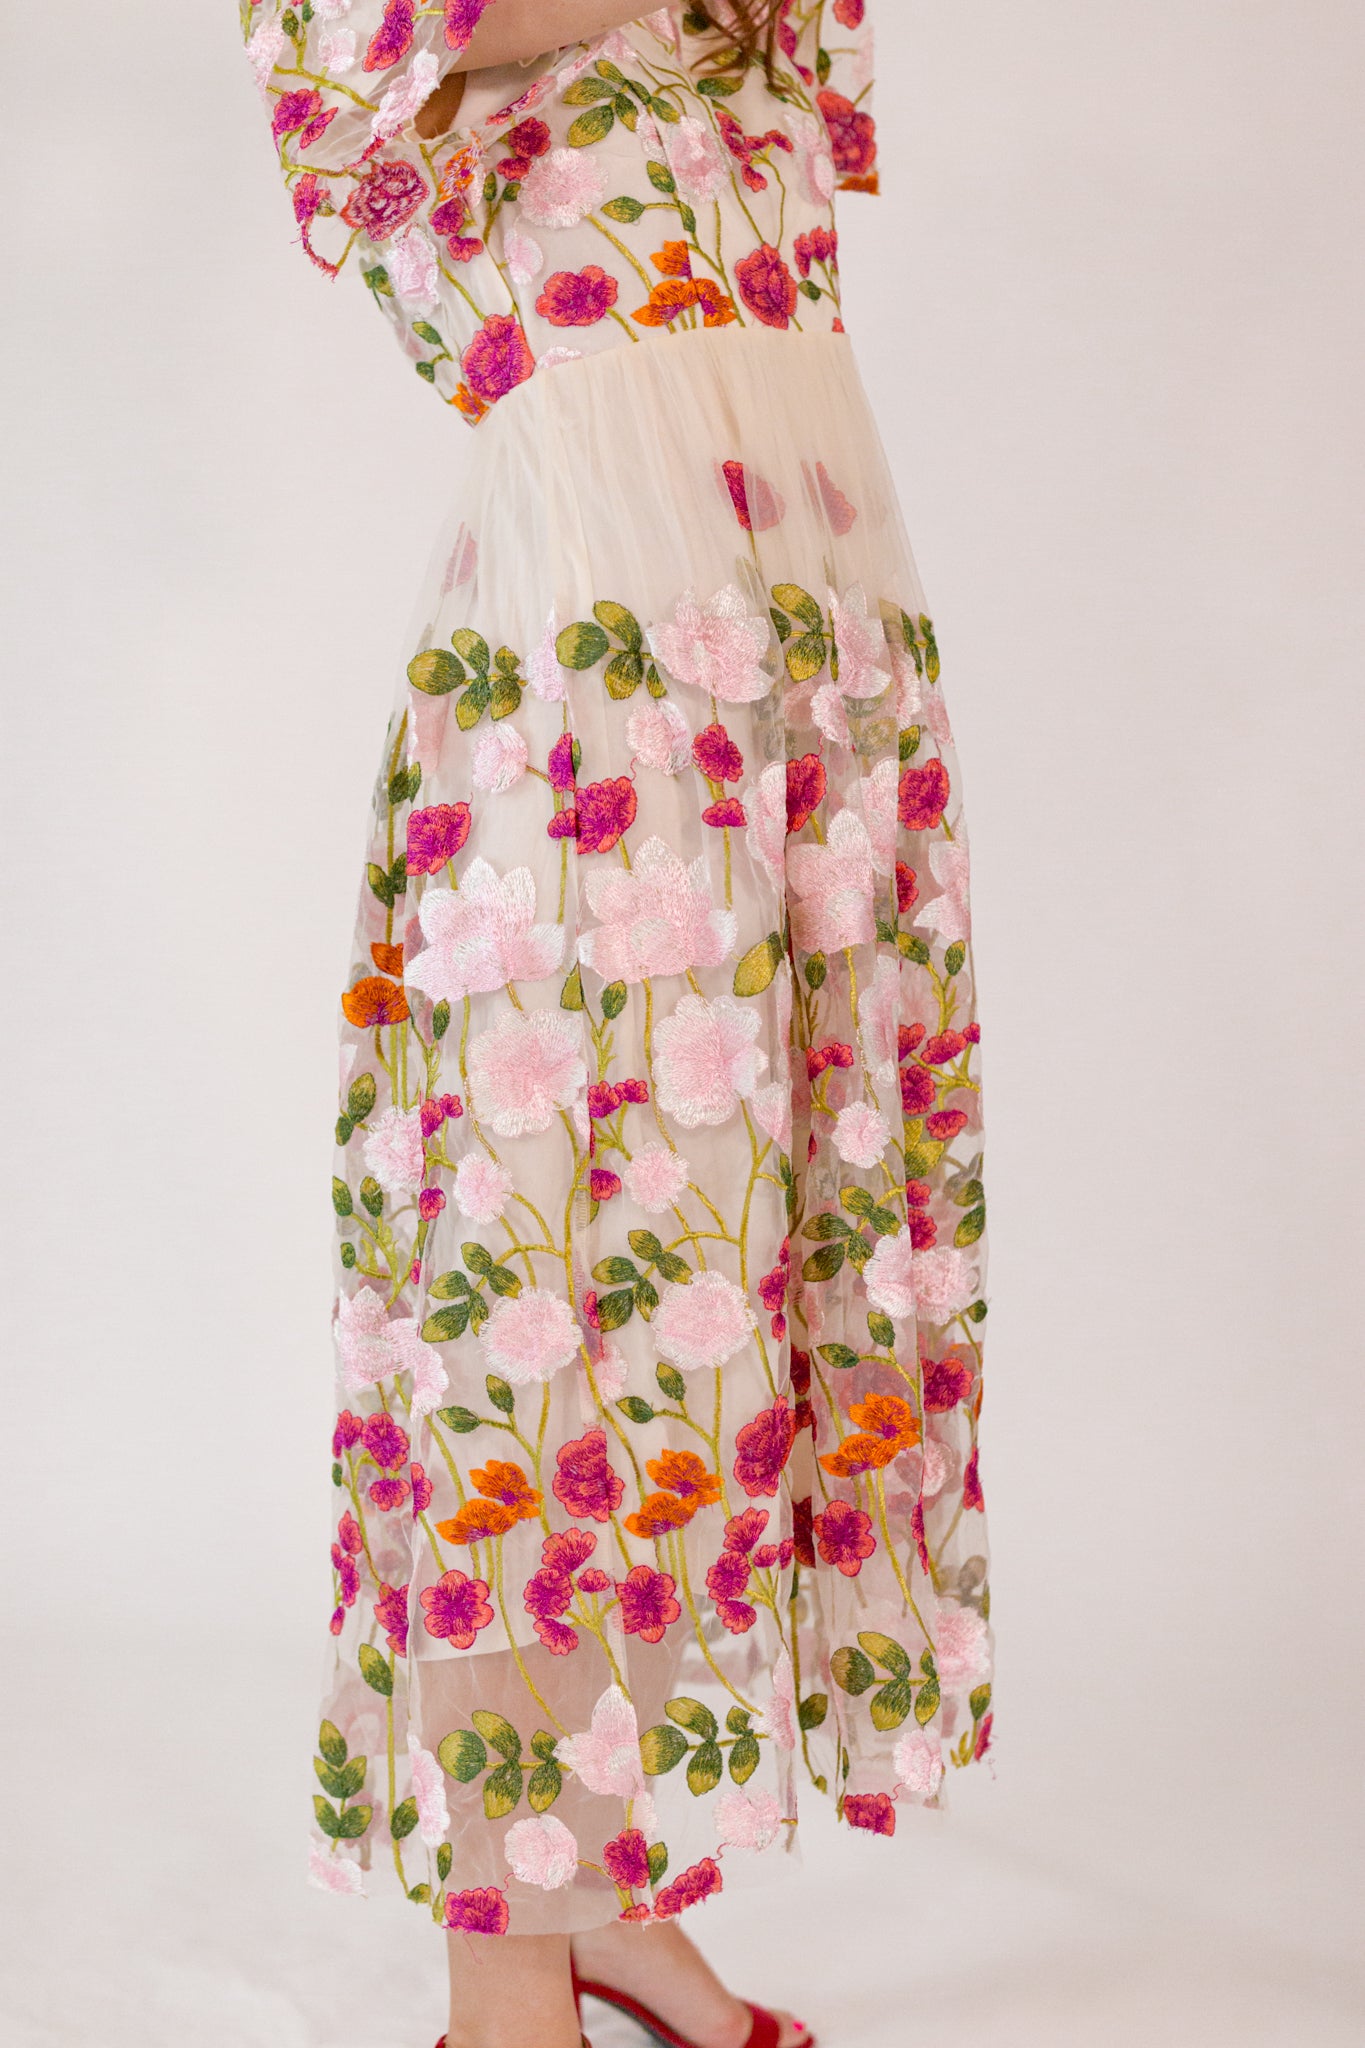 Lotus Embroidered Dress